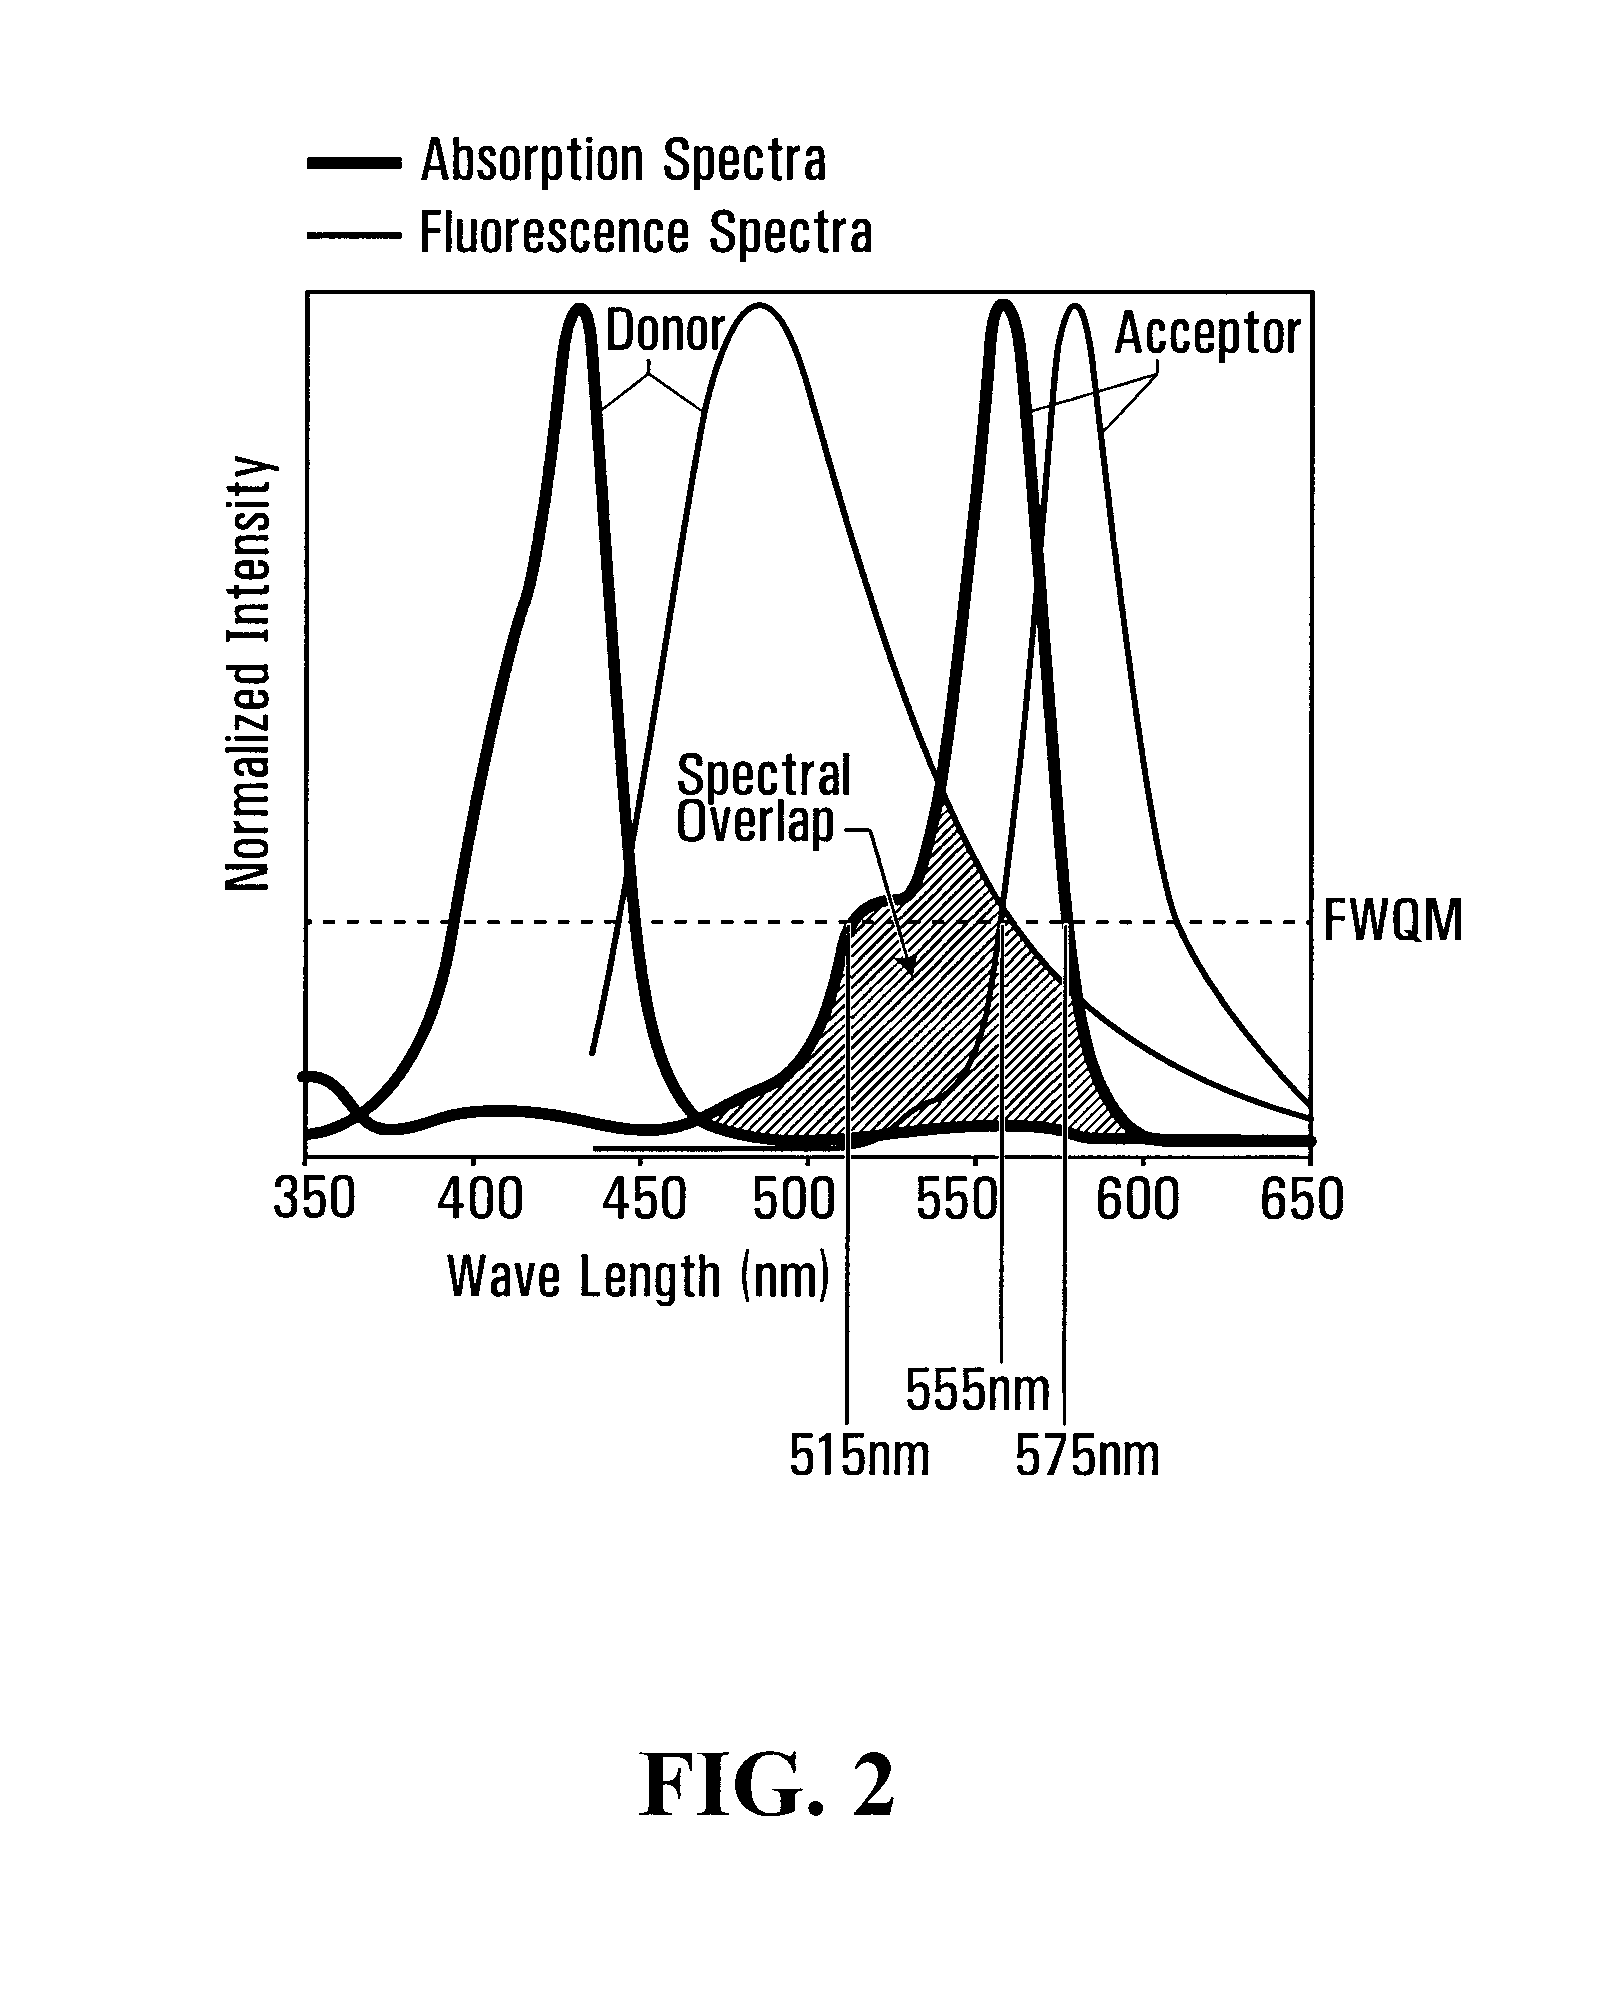 Biophotonic compositions comprising a chromophore and a gelling agent for treating wounds